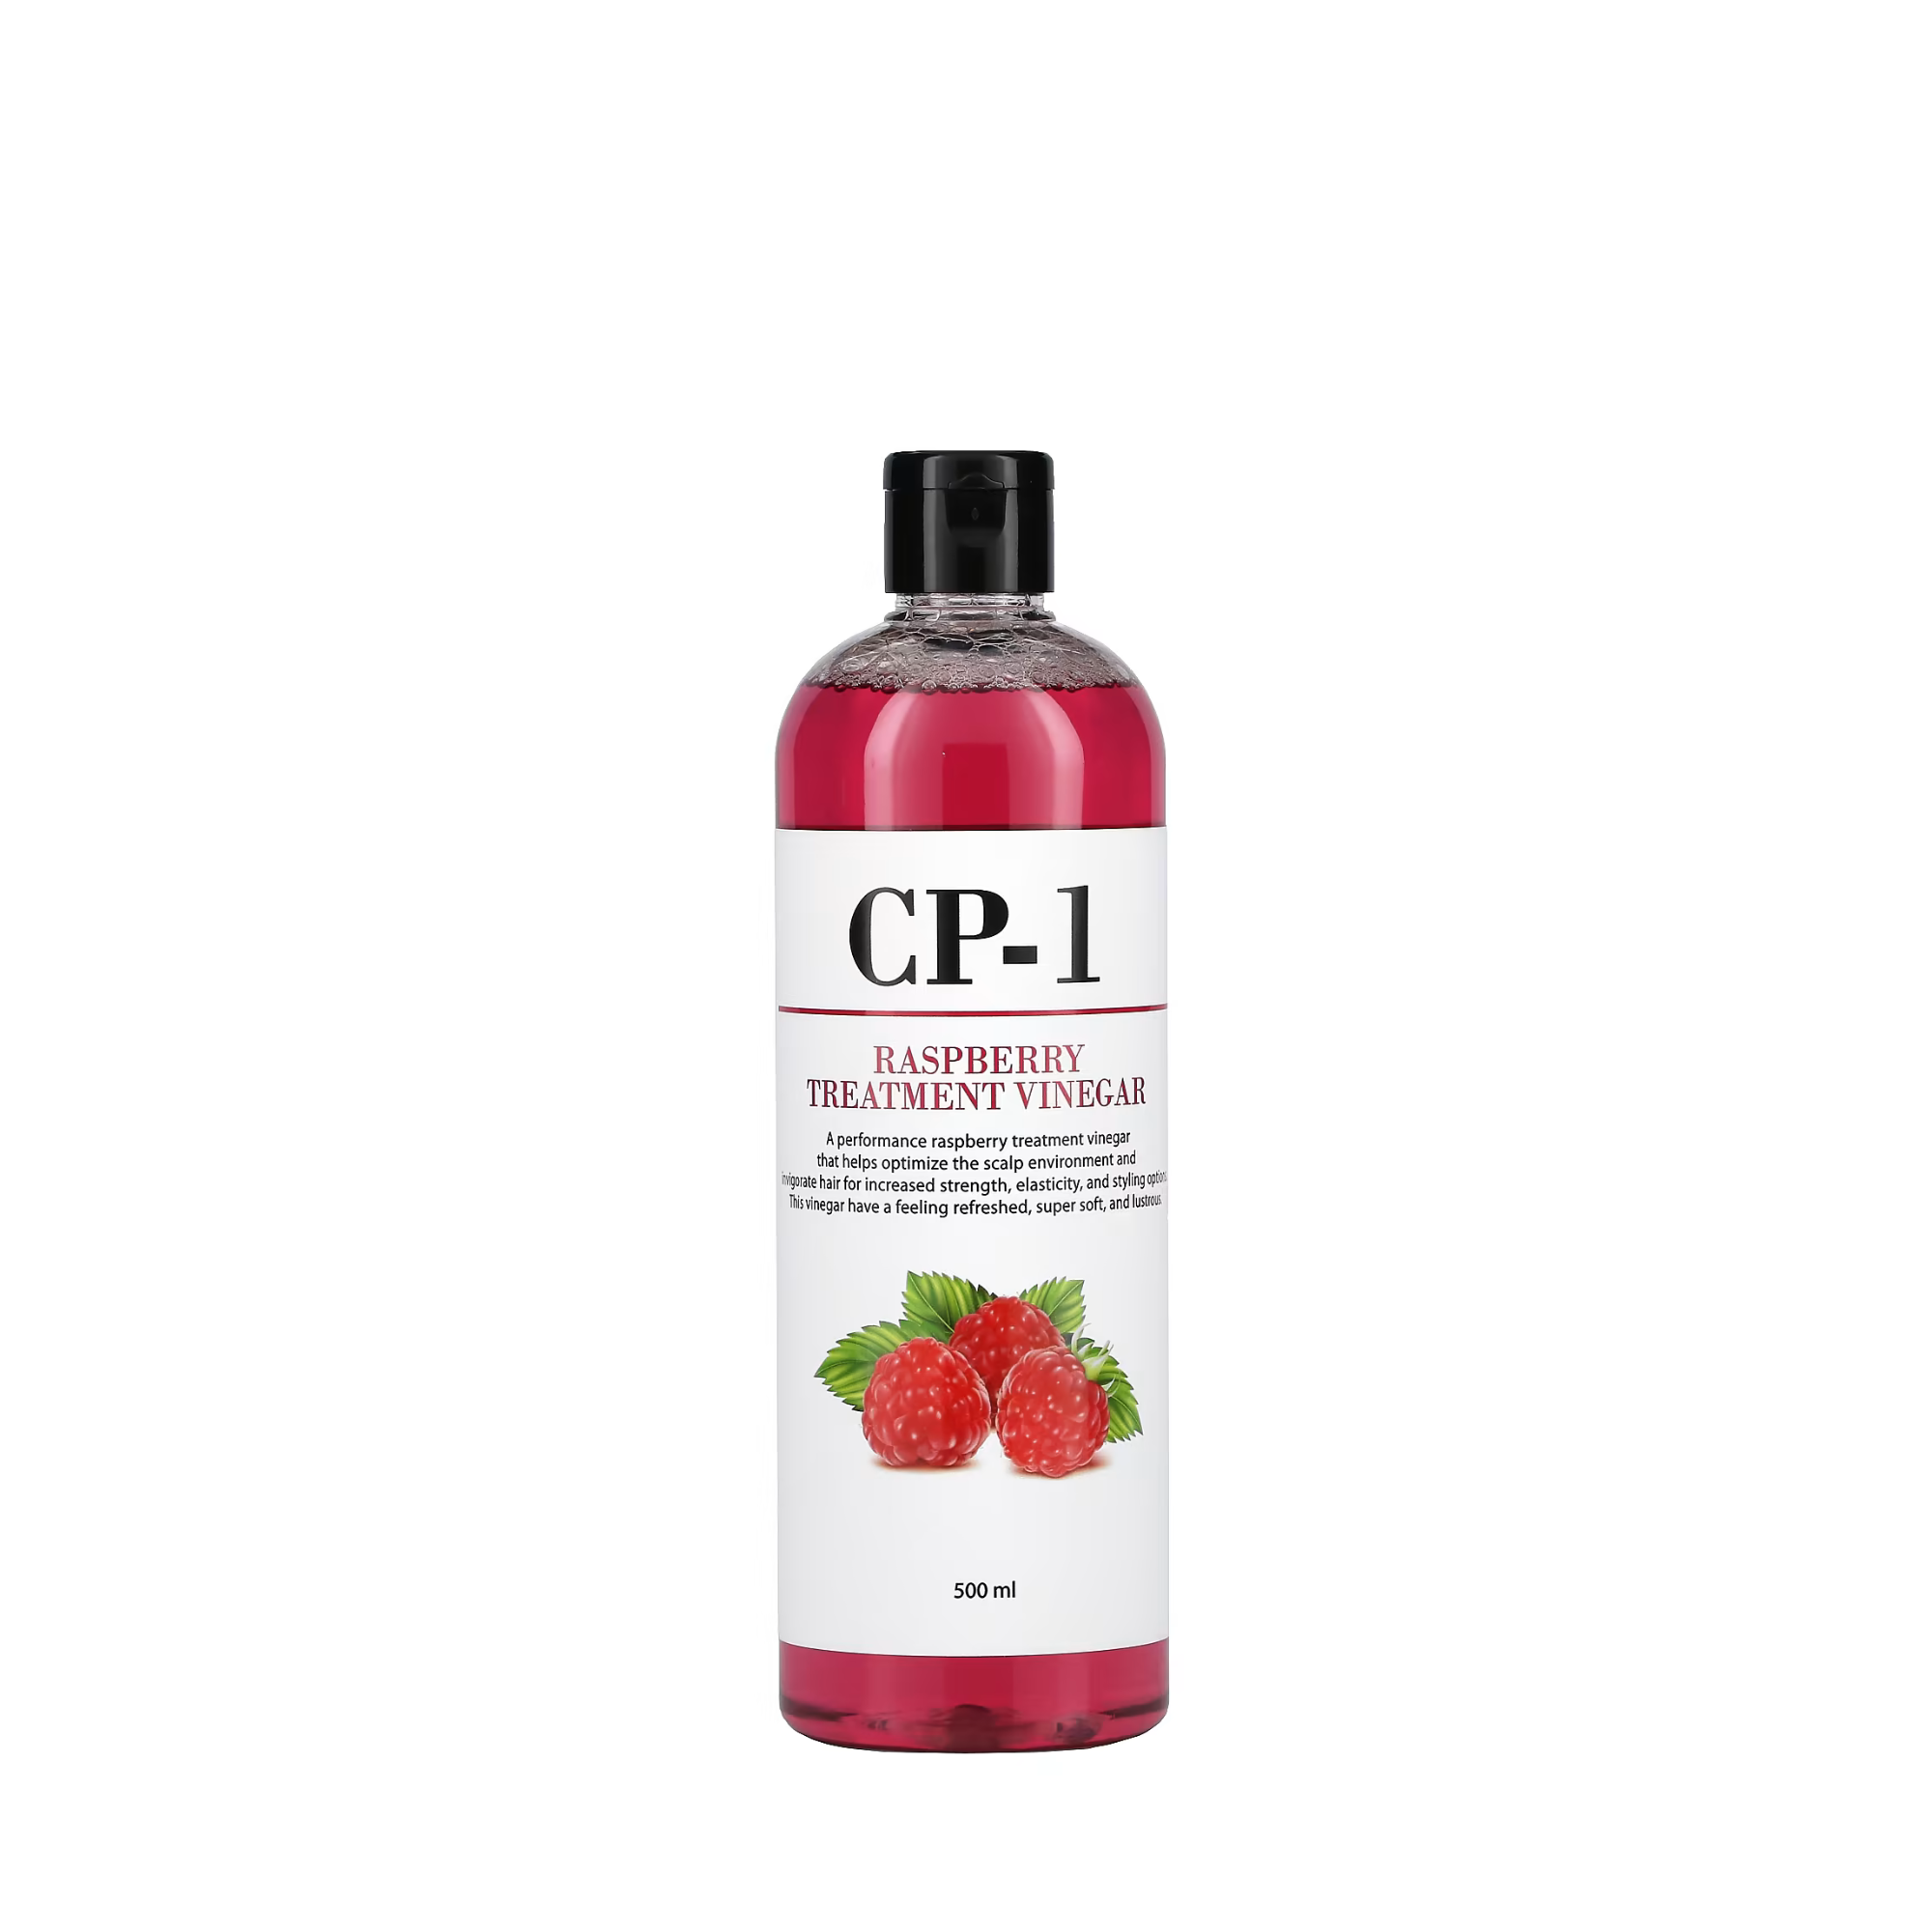 Raspberry treatment vinegar conditioner-rinse for hair by Esthetic House (Esthetic House CP-1 Raspberry Treatment Vinegar)